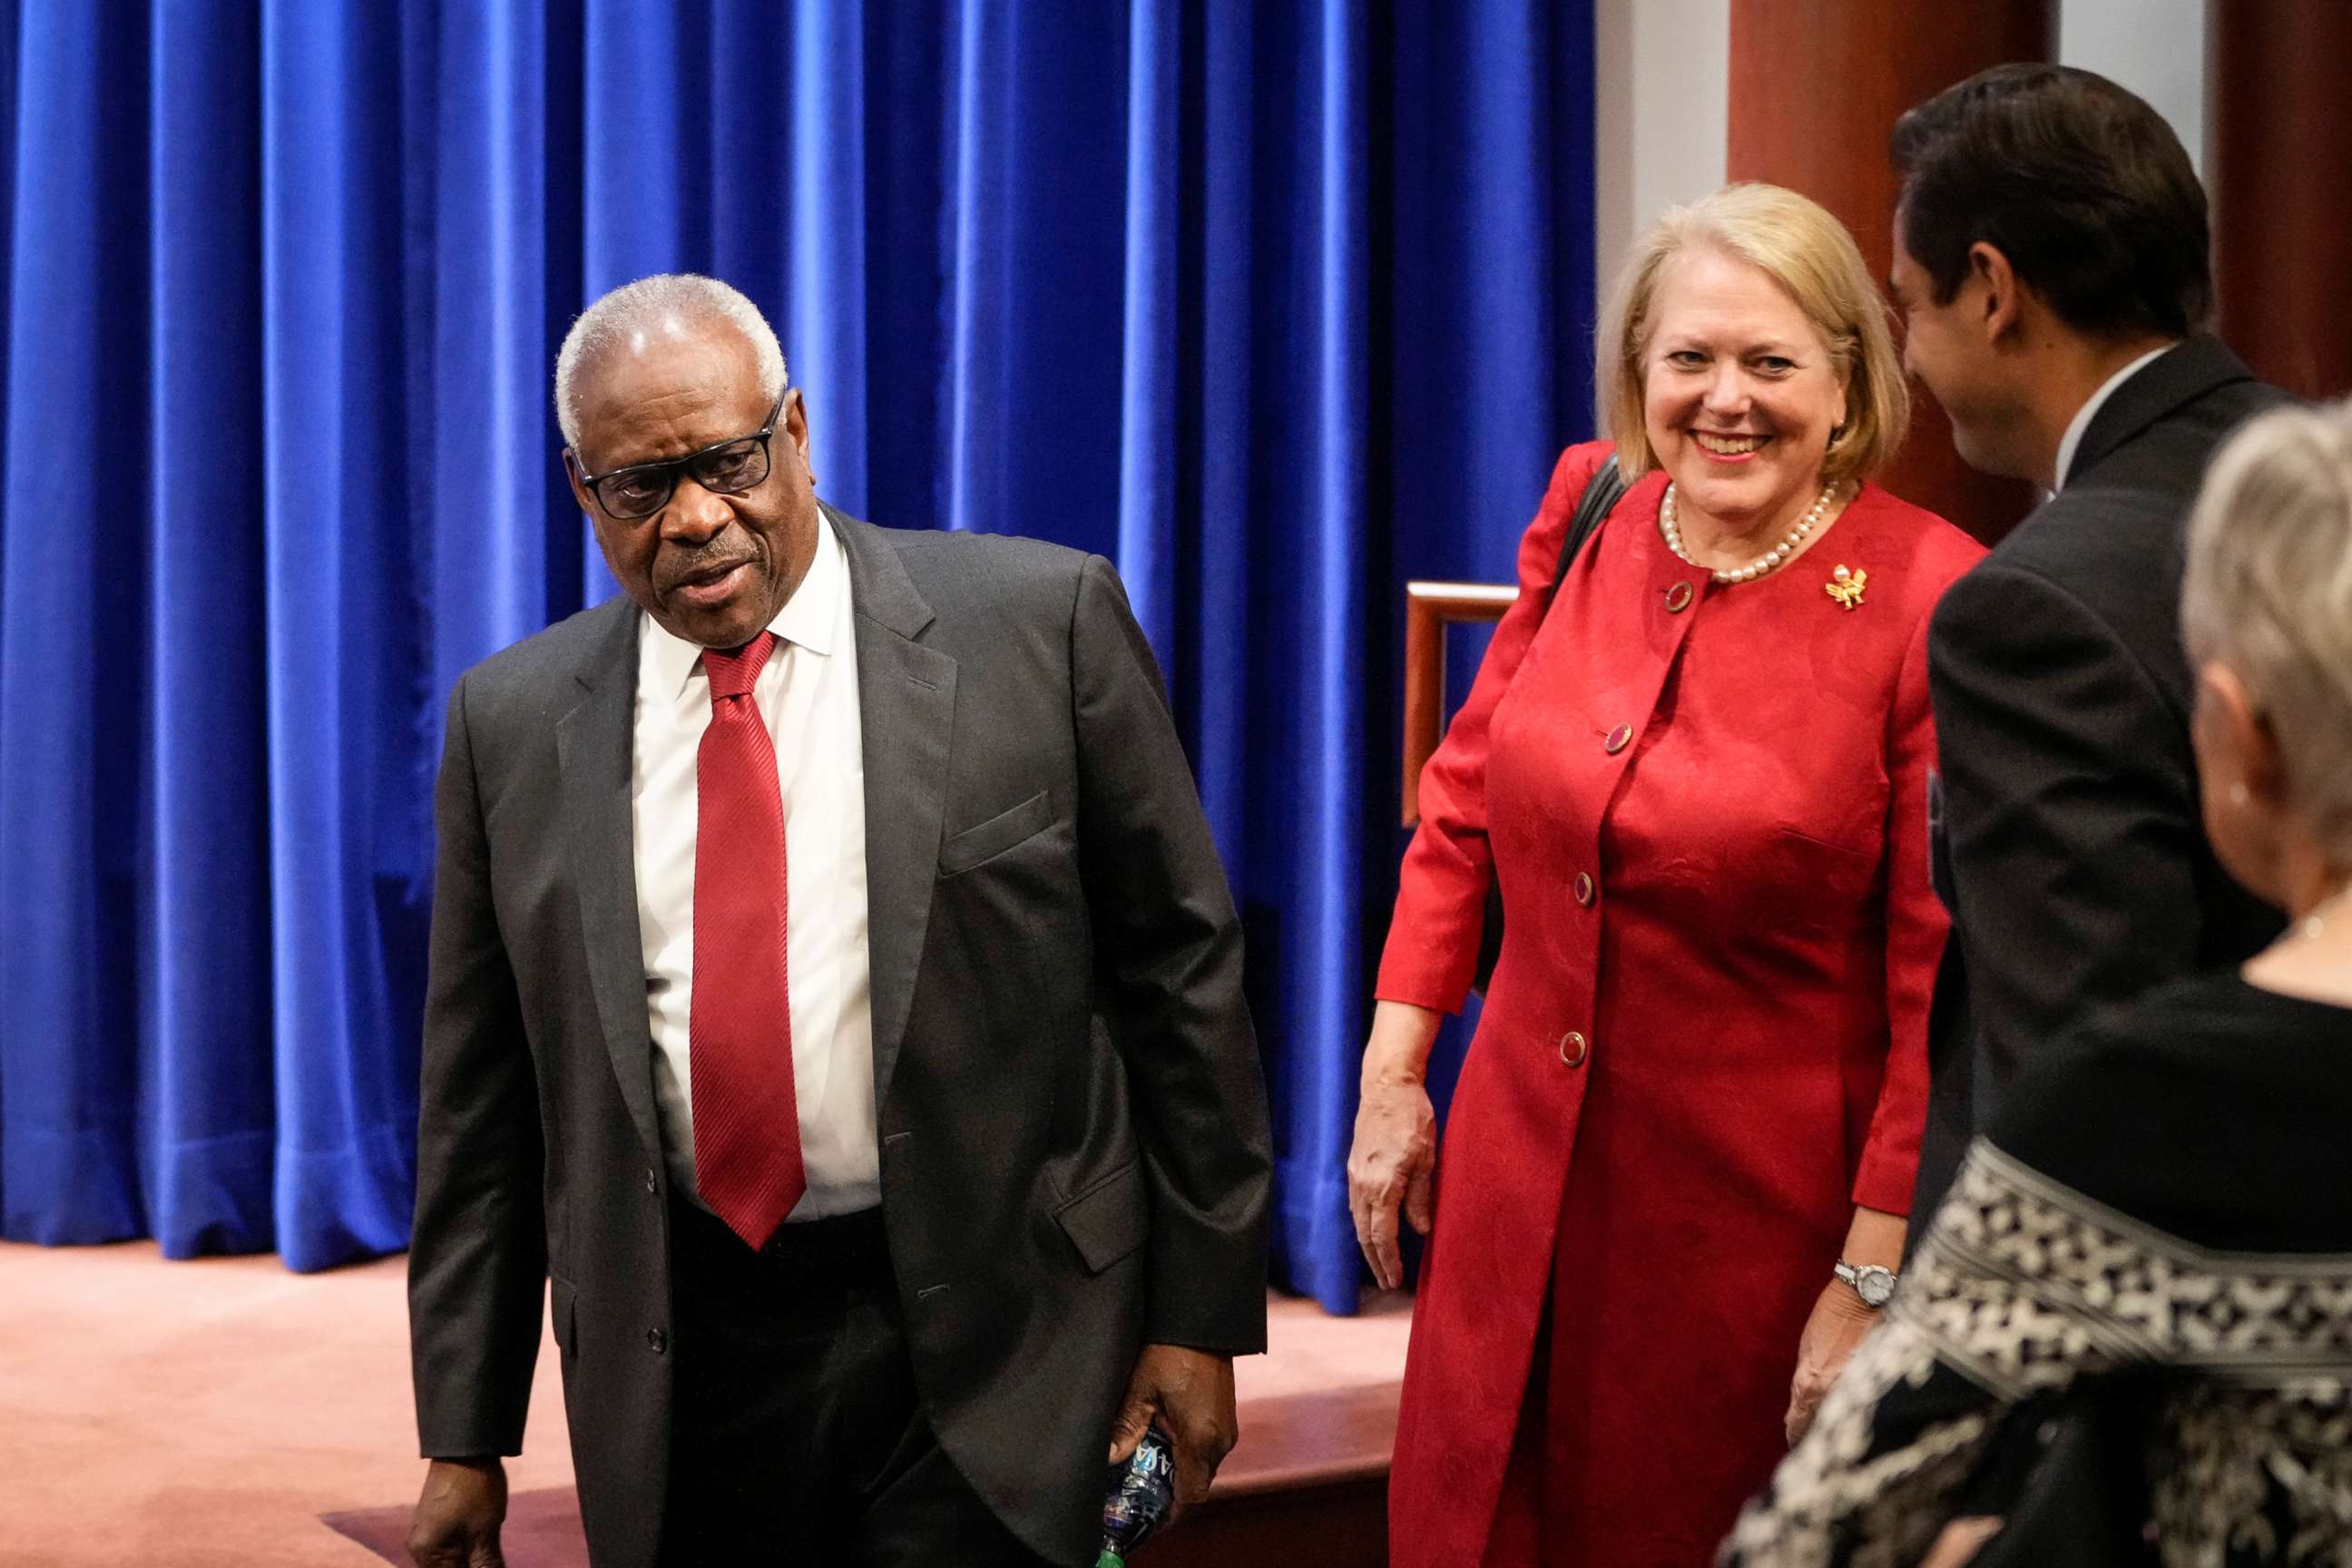 PHOTO: Supreme Court Justice Clarence Thomas and his wife Virginia Thomas arrive at the Heritage Foundation, Oct. 21, 2021, in Washington, D.C.